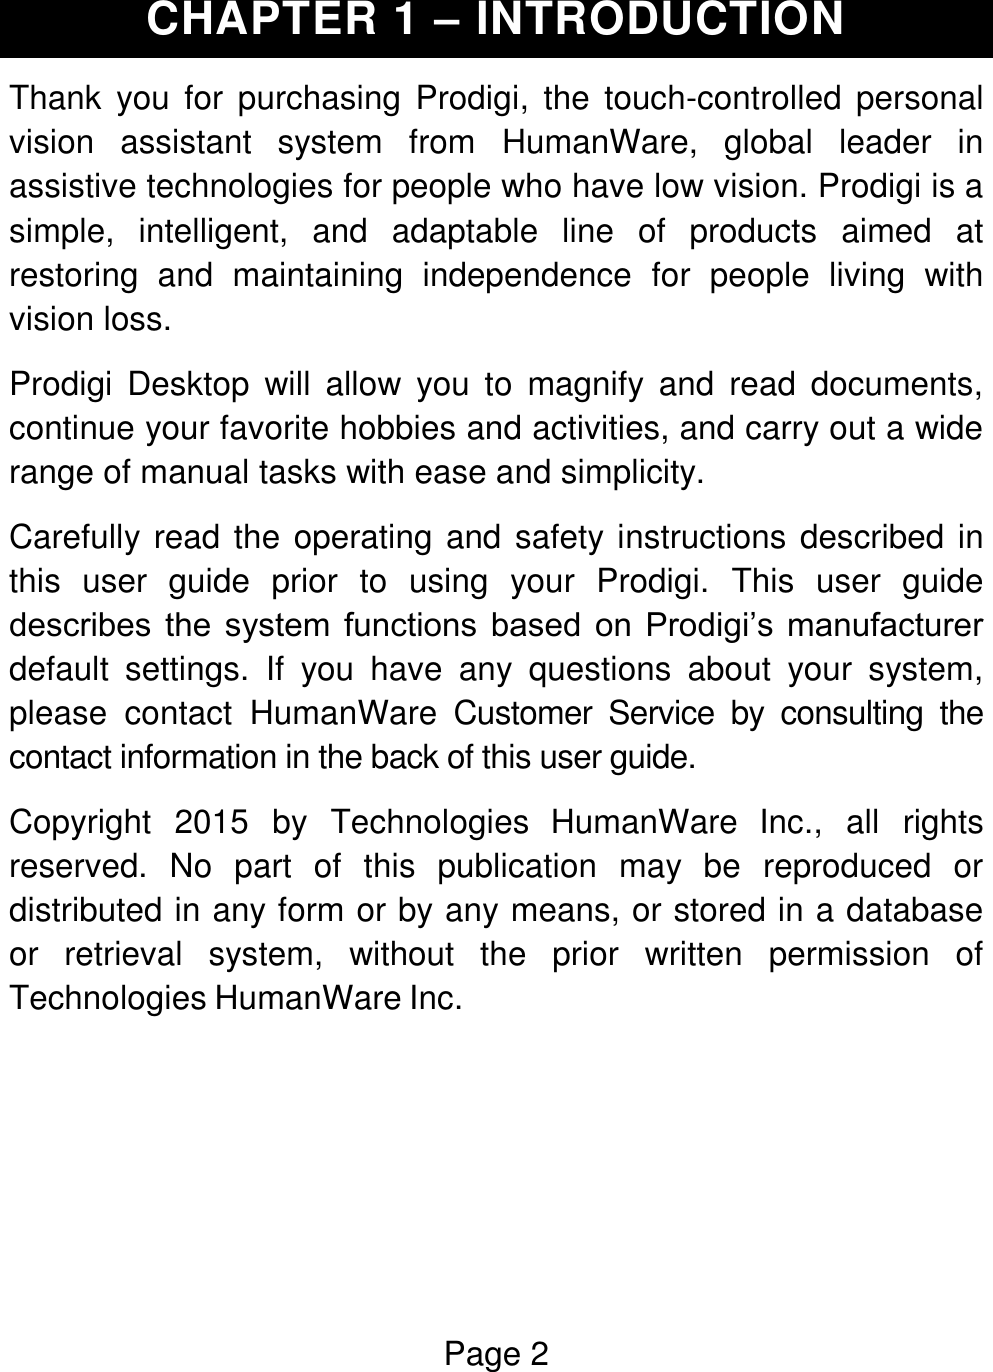 Page 2  CHAPTER 1 – INTRODUCTION Thank  you  for  purchasing  Prodigi,  the touch-controlled  personal vision  assistant  system  from  HumanWare,  global  leader  in assistive technologies for people who have low vision. Prodigi is a simple,  intelligent,  and  adaptable  line  of  products  aimed  at restoring  and  maintaining  independence  for  people  living  with vision loss. Prodigi  Desktop  will  allow  you  to  magnify  and  read  documents, continue your favorite hobbies and activities, and carry out a wide range of manual tasks with ease and simplicity. Carefully read the operating and safety instructions described in this  user  guide  prior  to  using  your  Prodigi.  This  user  guide describes  the  system  functions  based  on  Prodigi’s  manufacturer default  settings.  If  you  have  any  questions  about  your  system, please  contact  HumanWare  Customer  Service  by  consulting  the contact information in the back of this user guide. Copyright  2015  by  Technologies  HumanWare  Inc.,  all  rights reserved.  No  part  of  this  publication  may  be  reproduced  or distributed in any form or by any means, or stored in a database or  retrieval  system,  without  the  prior  written  permission  of Technologies HumanWare Inc.     